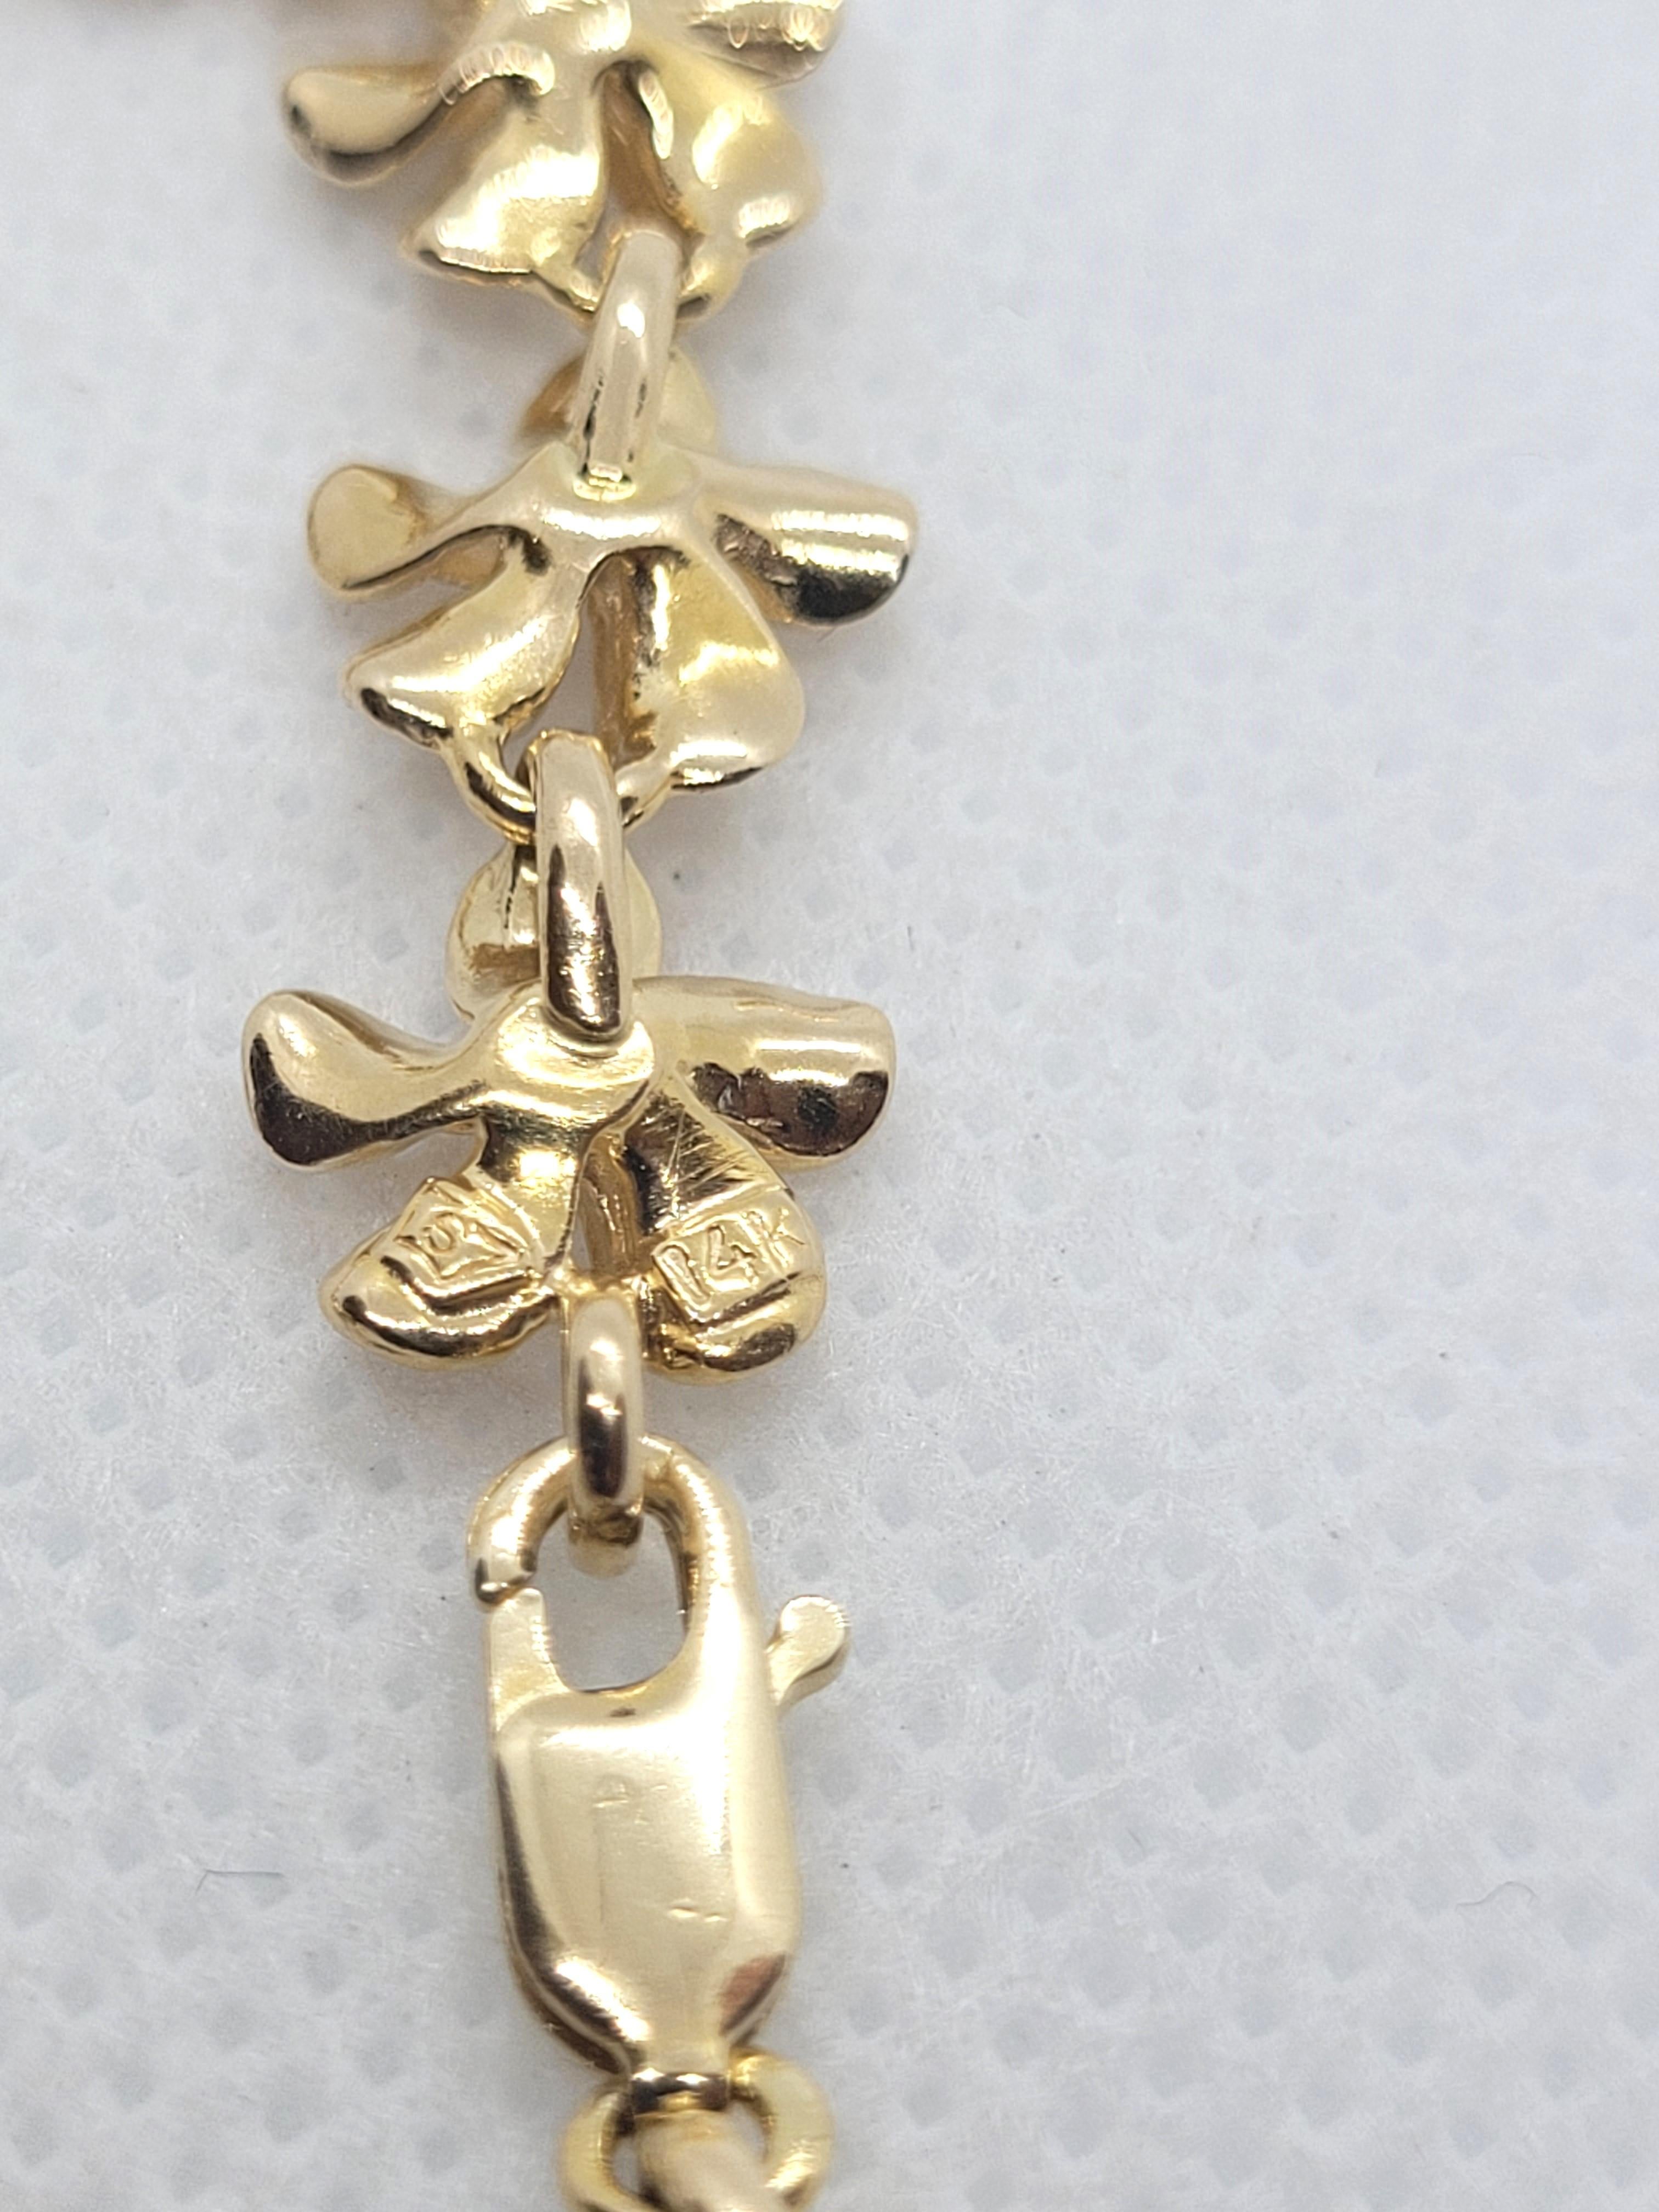 Beautiful 14kt yellow gold plumeria flower link bracelet that is 6.5 inches in length, 9.36mm wide, and 3.4mm thick. The bracelet weighs 8.5 grams, is secured with a lobster clasp, stamped 14kt yellow gold, and overall, is in very good condition.